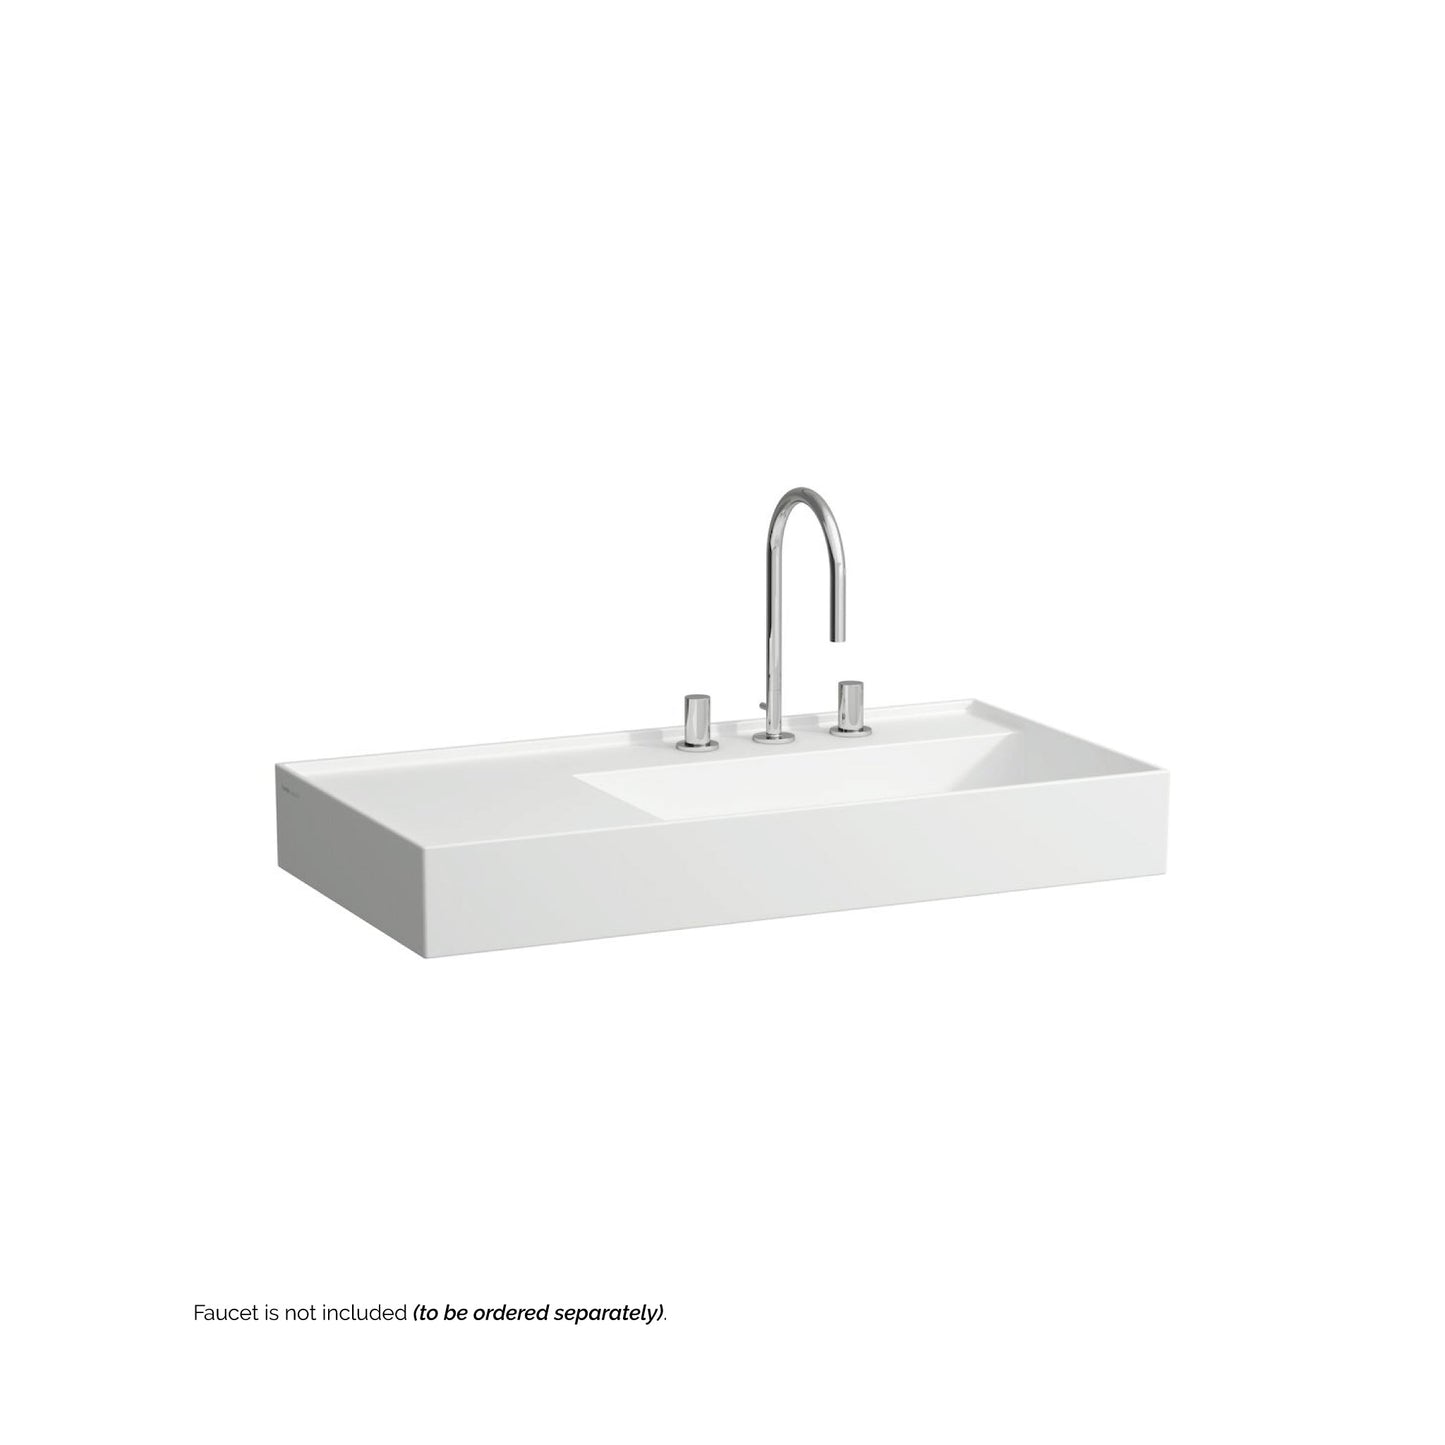 Laufen Kartell 35" x 18" Matte White Wall-Mounted Shelf-Left Bathroom Sink With 3 Faucet Holes